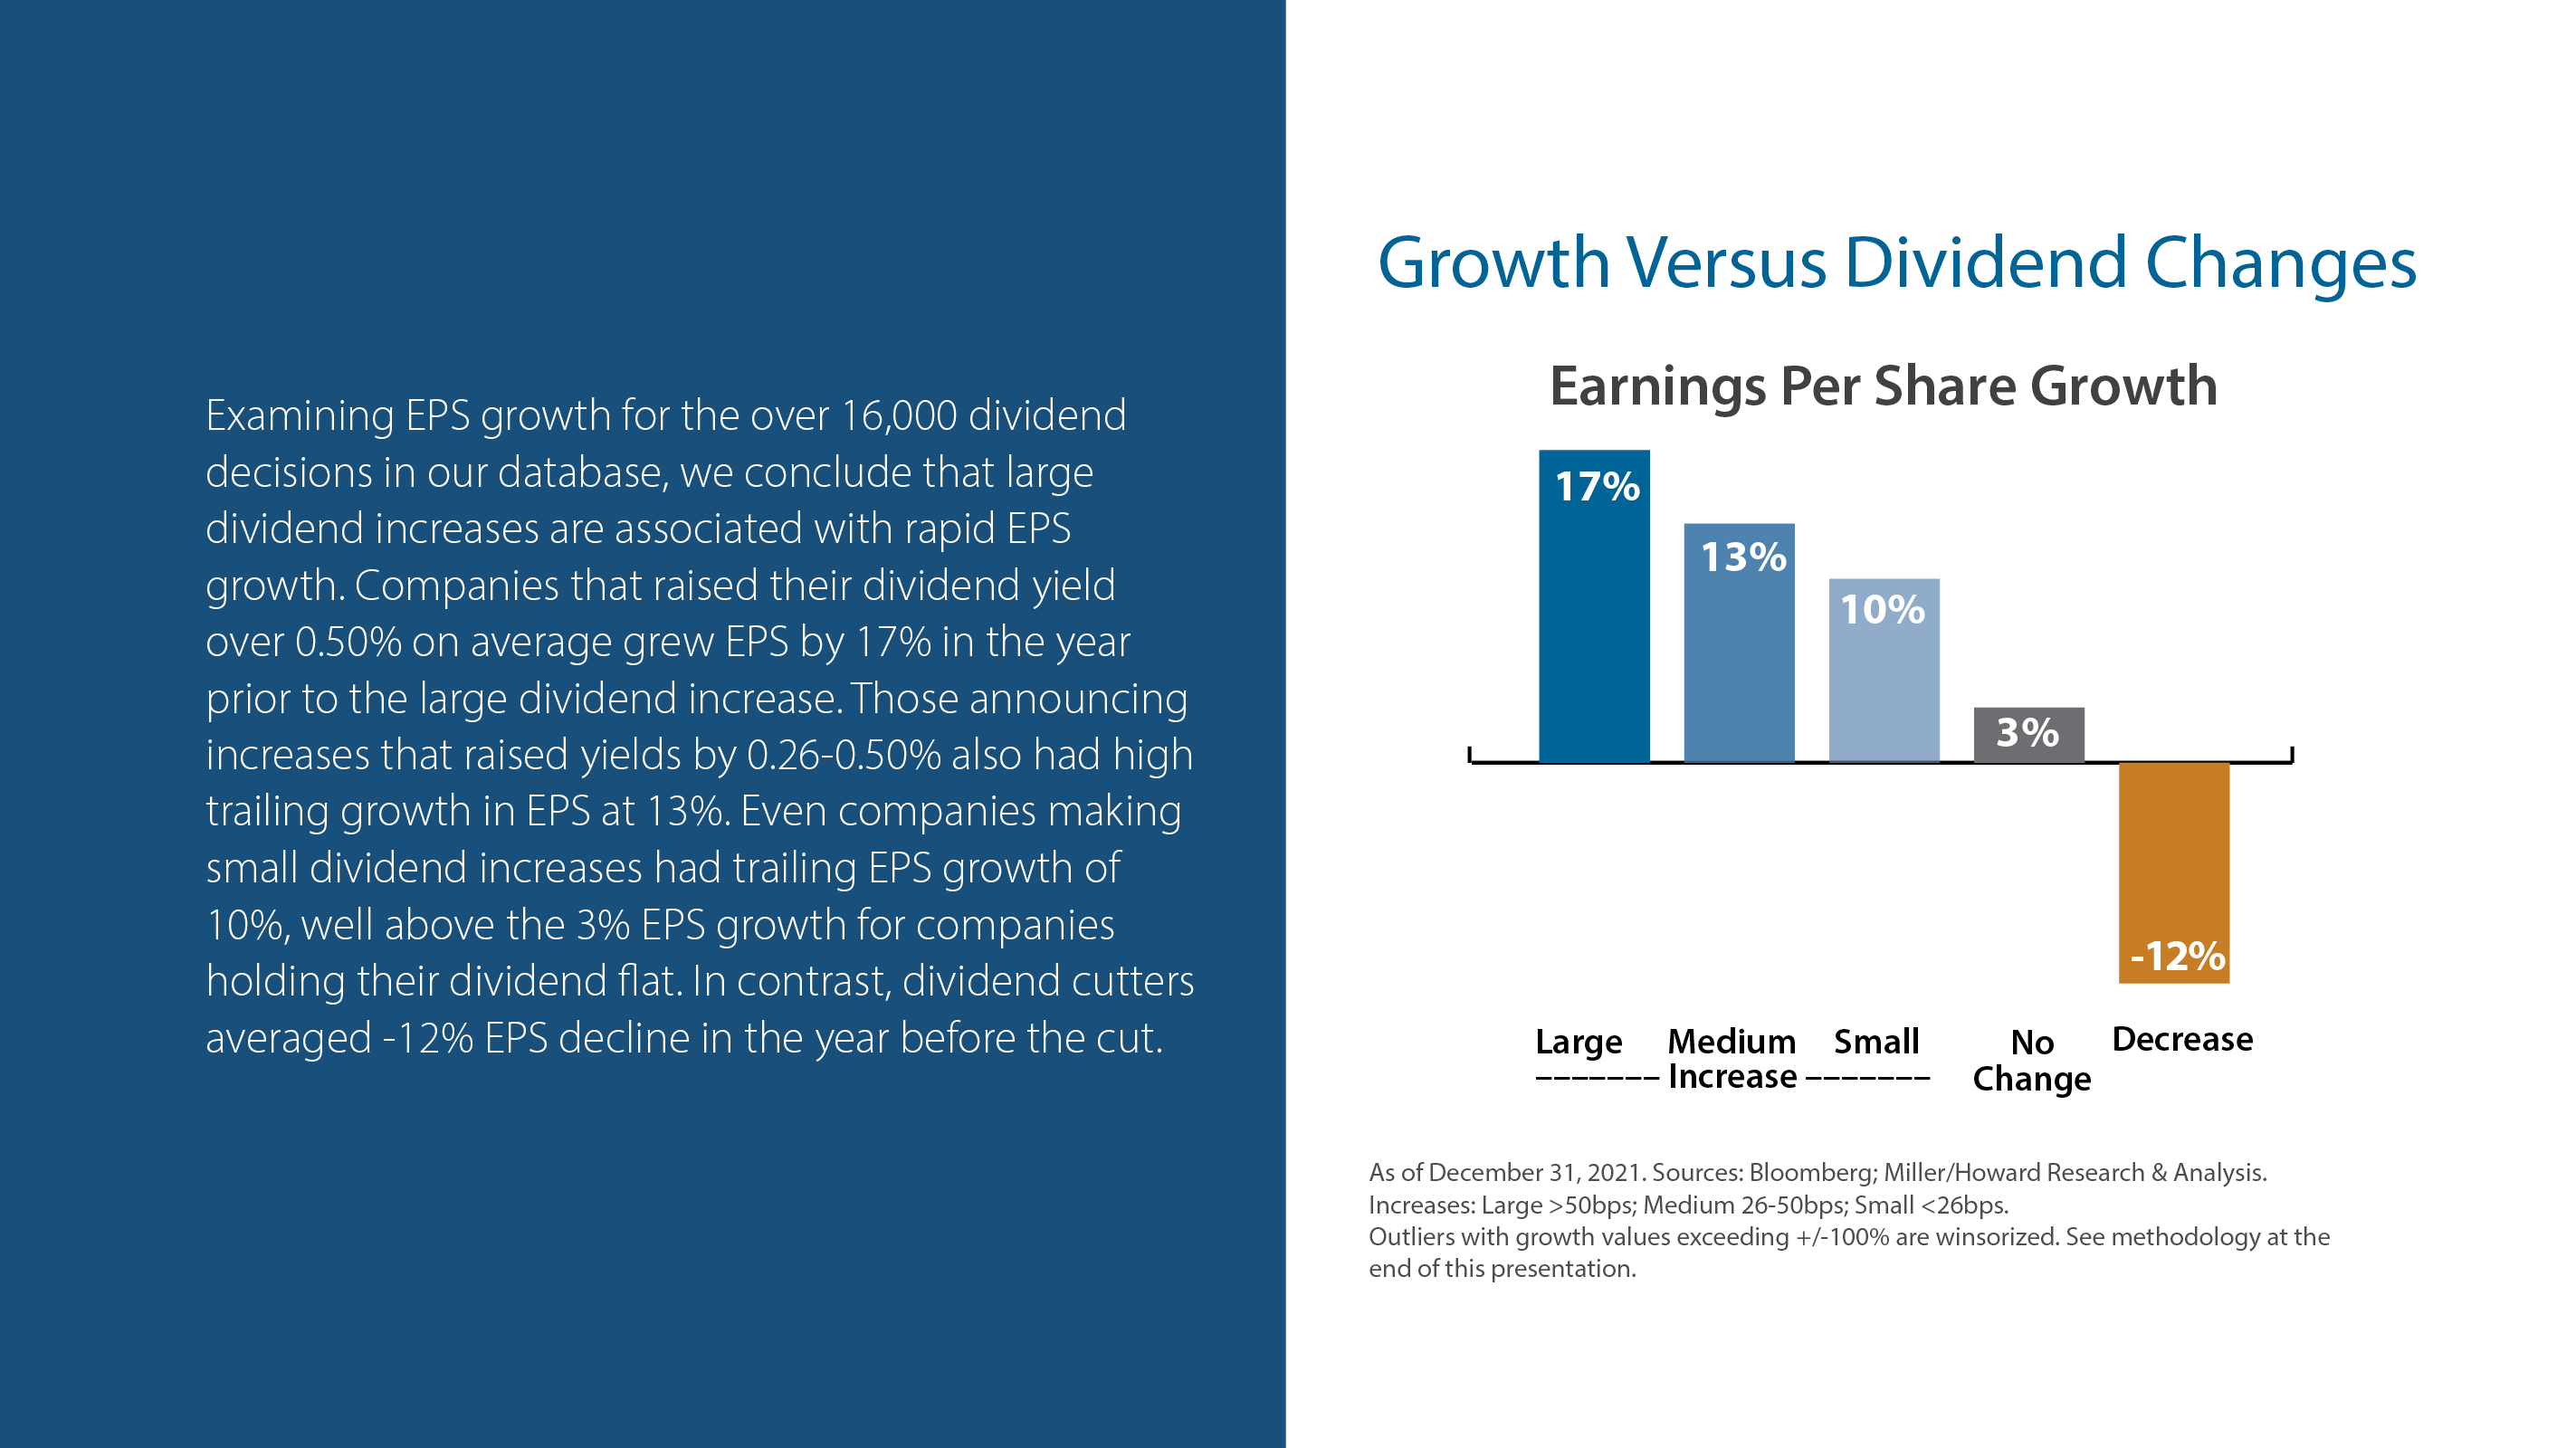 Growth Versus Dividend Changes 1 - Earnings Per Share Growth